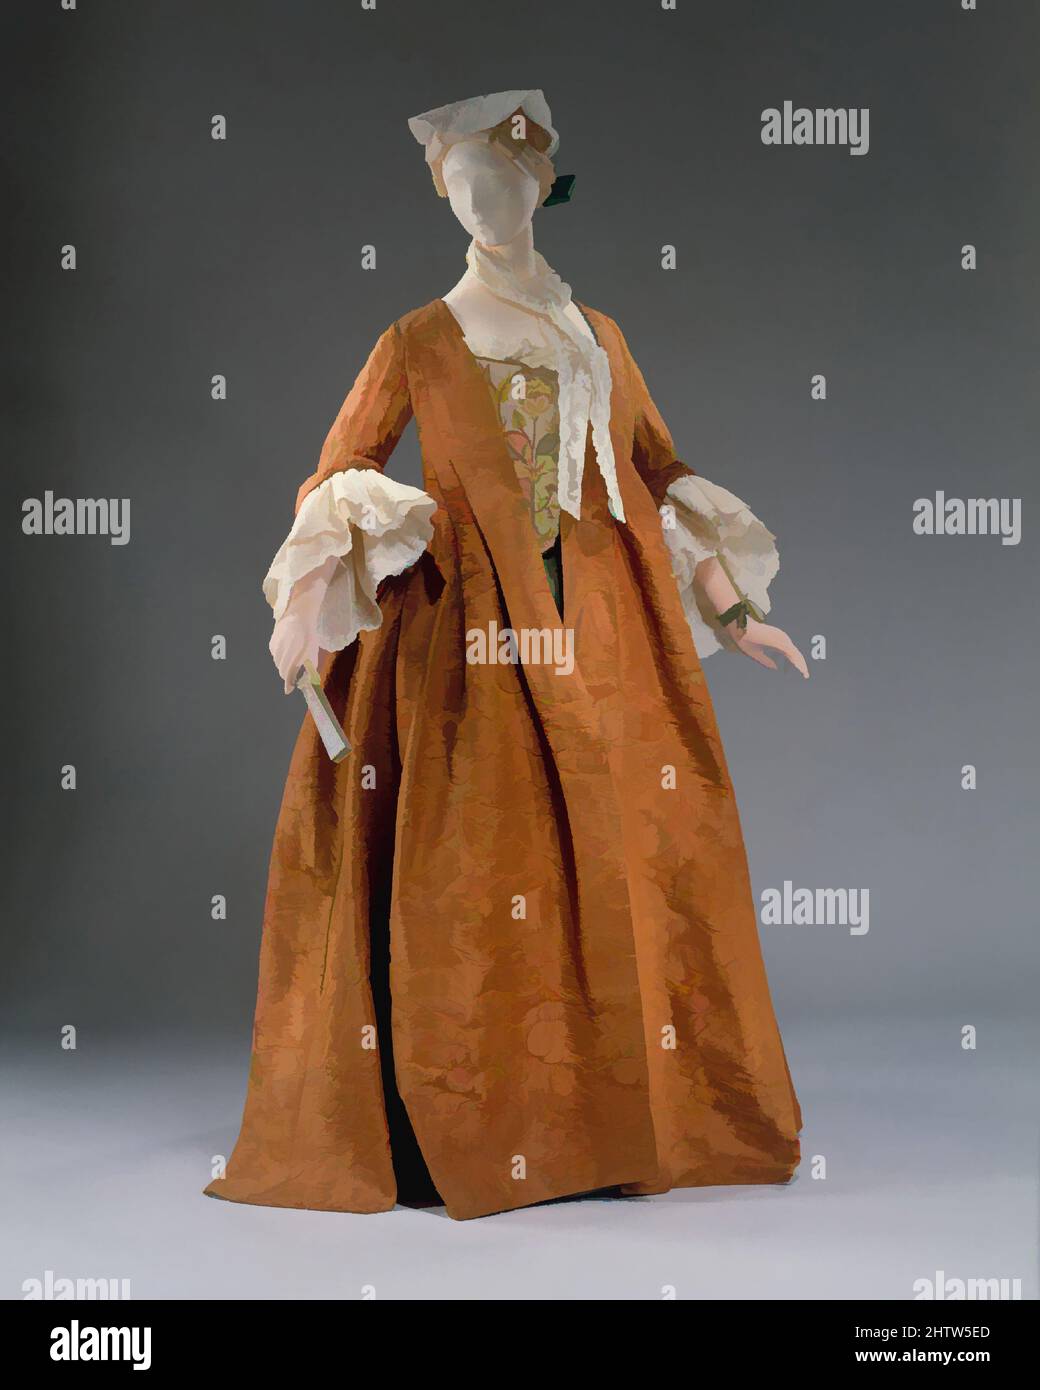 Art inspired by Dress, 1735–40, French, silk, flax, This open robe, lacking petticoat, in spice brown damask reveals both the wide circumstance of the 1730s style, just before the flattening out that occurred at mid-century, and the hedonism of extraordinary damask, even when it's, Classic works modernized by Artotop with a splash of modernity. Shapes, color and value, eye-catching visual impact on art. Emotions through freedom of artworks in a contemporary way. A timeless message pursuing a wildly creative new direction. Artists turning to the digital medium and creating the Artotop NFT Stock Photo